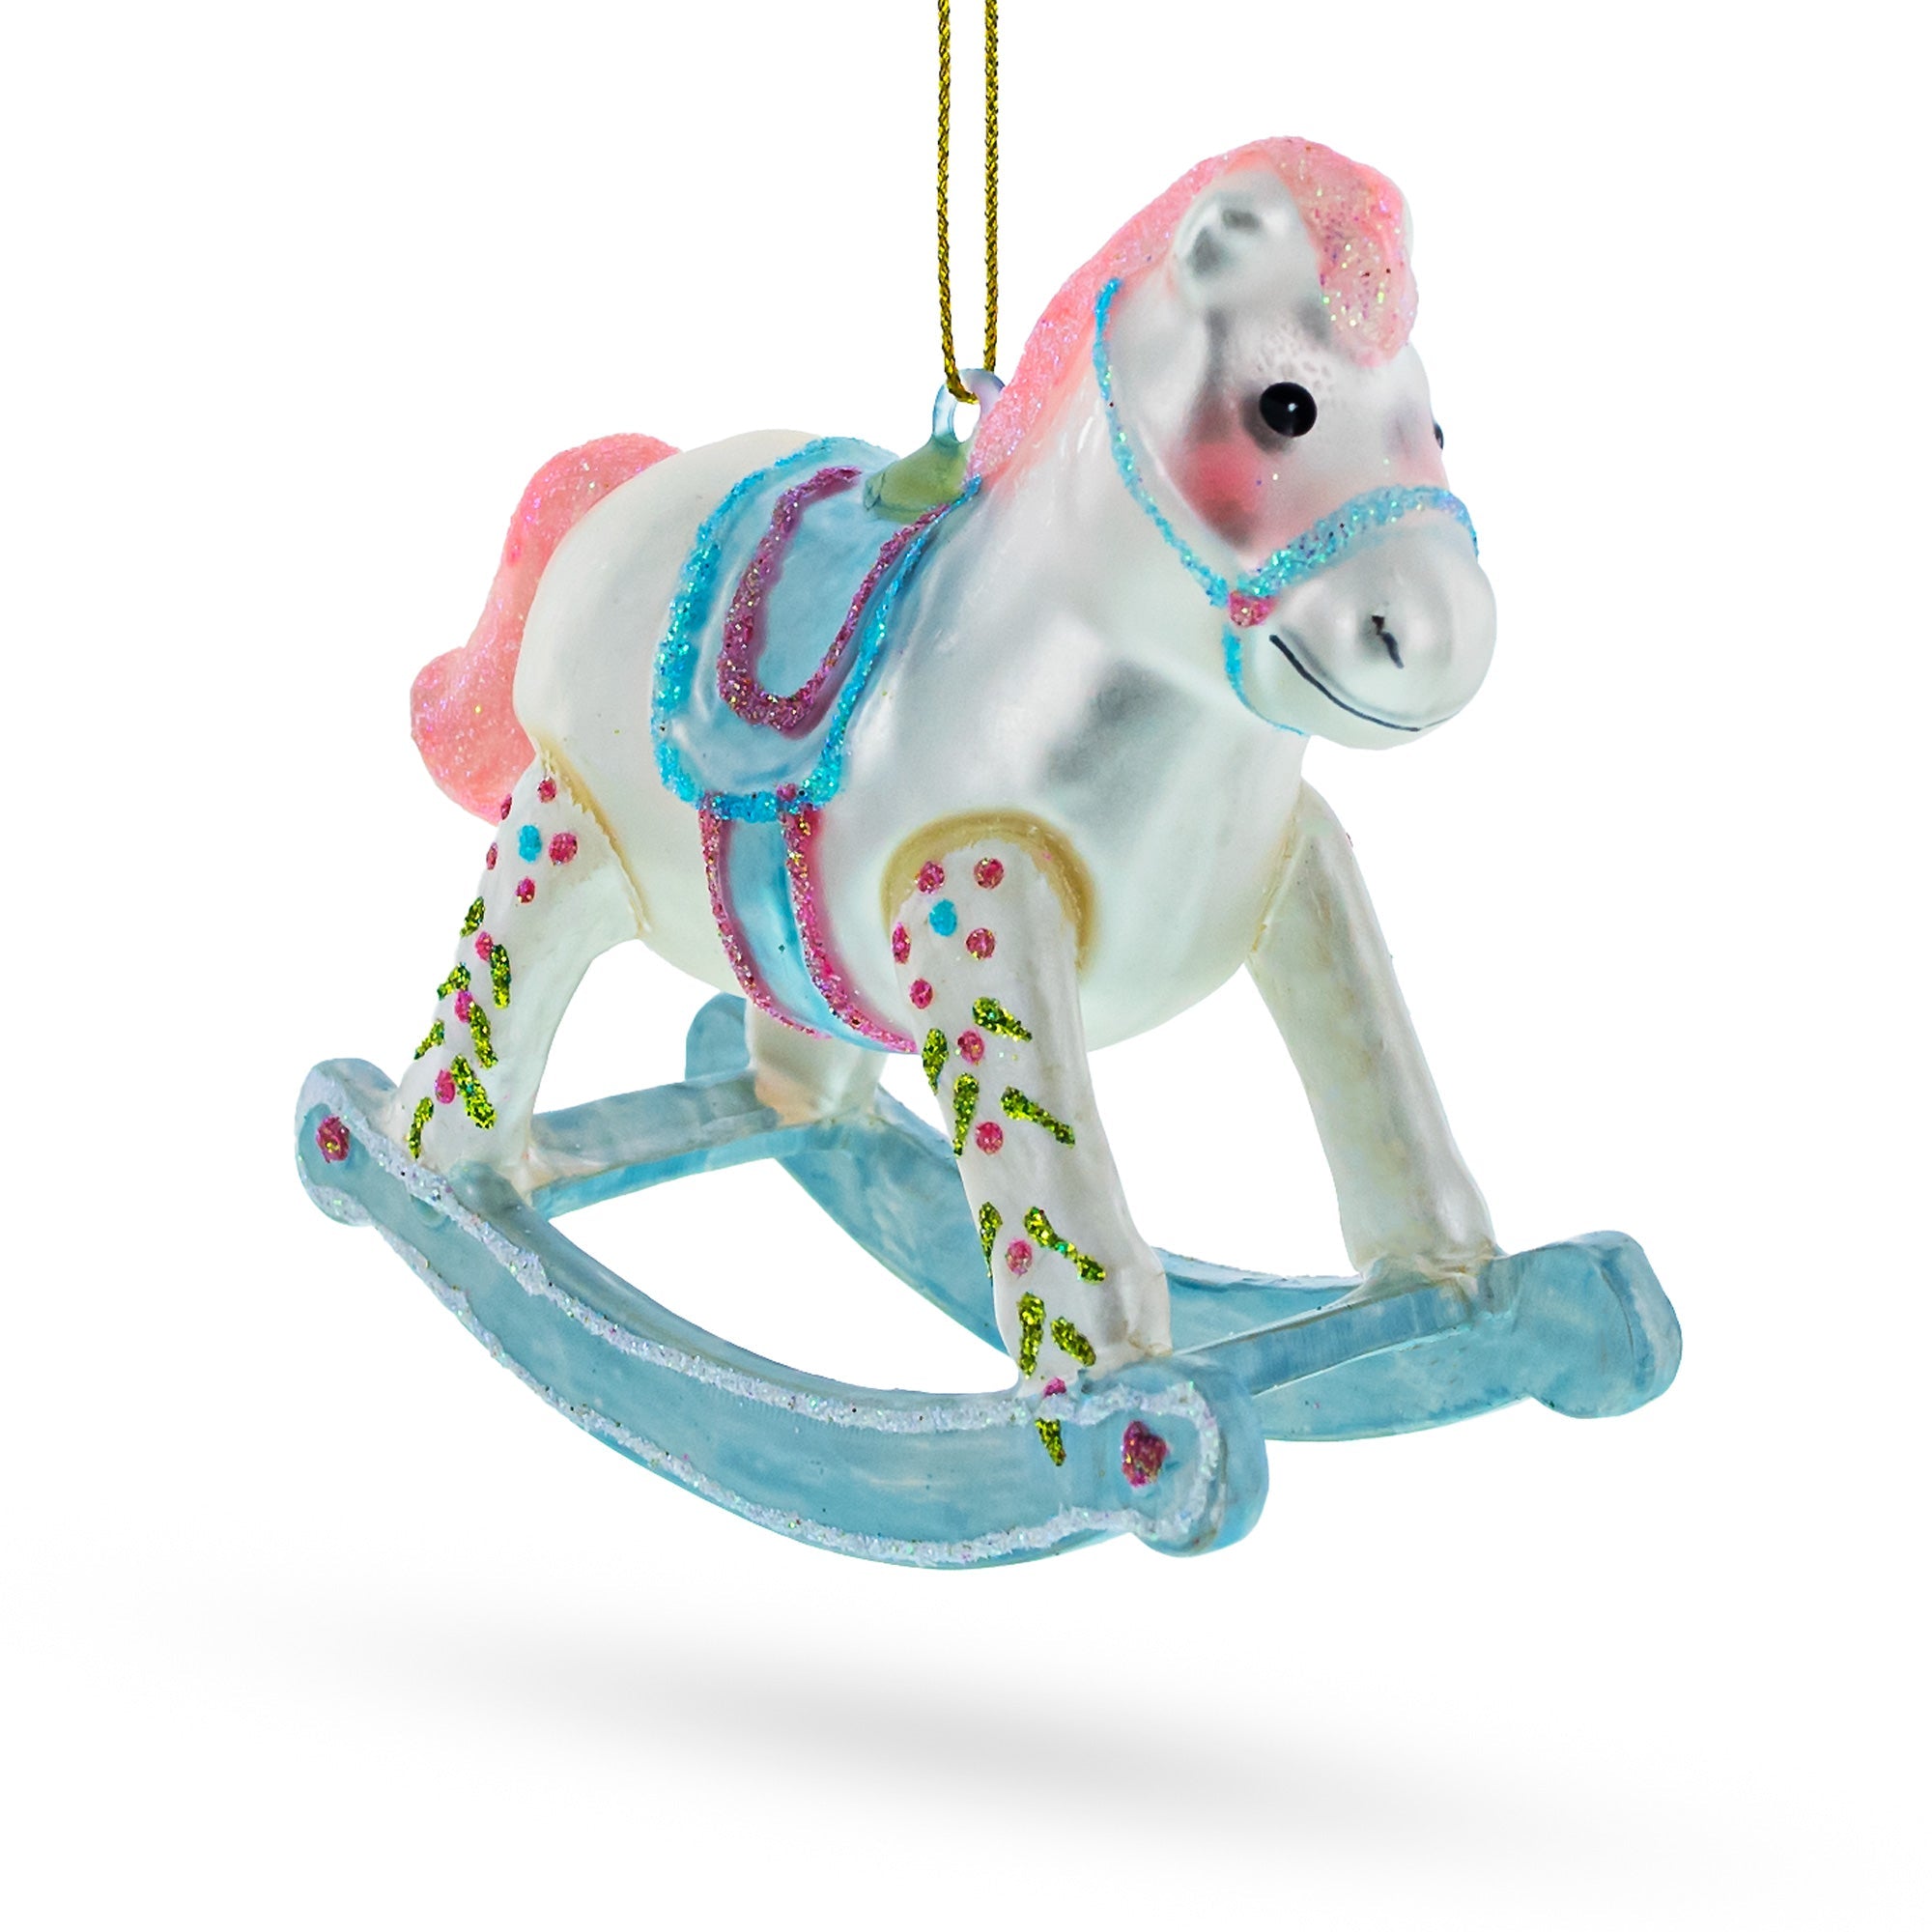 Baby Boy's Blue Rocking Horse - Lovable Blown Glass Christmas Ornament